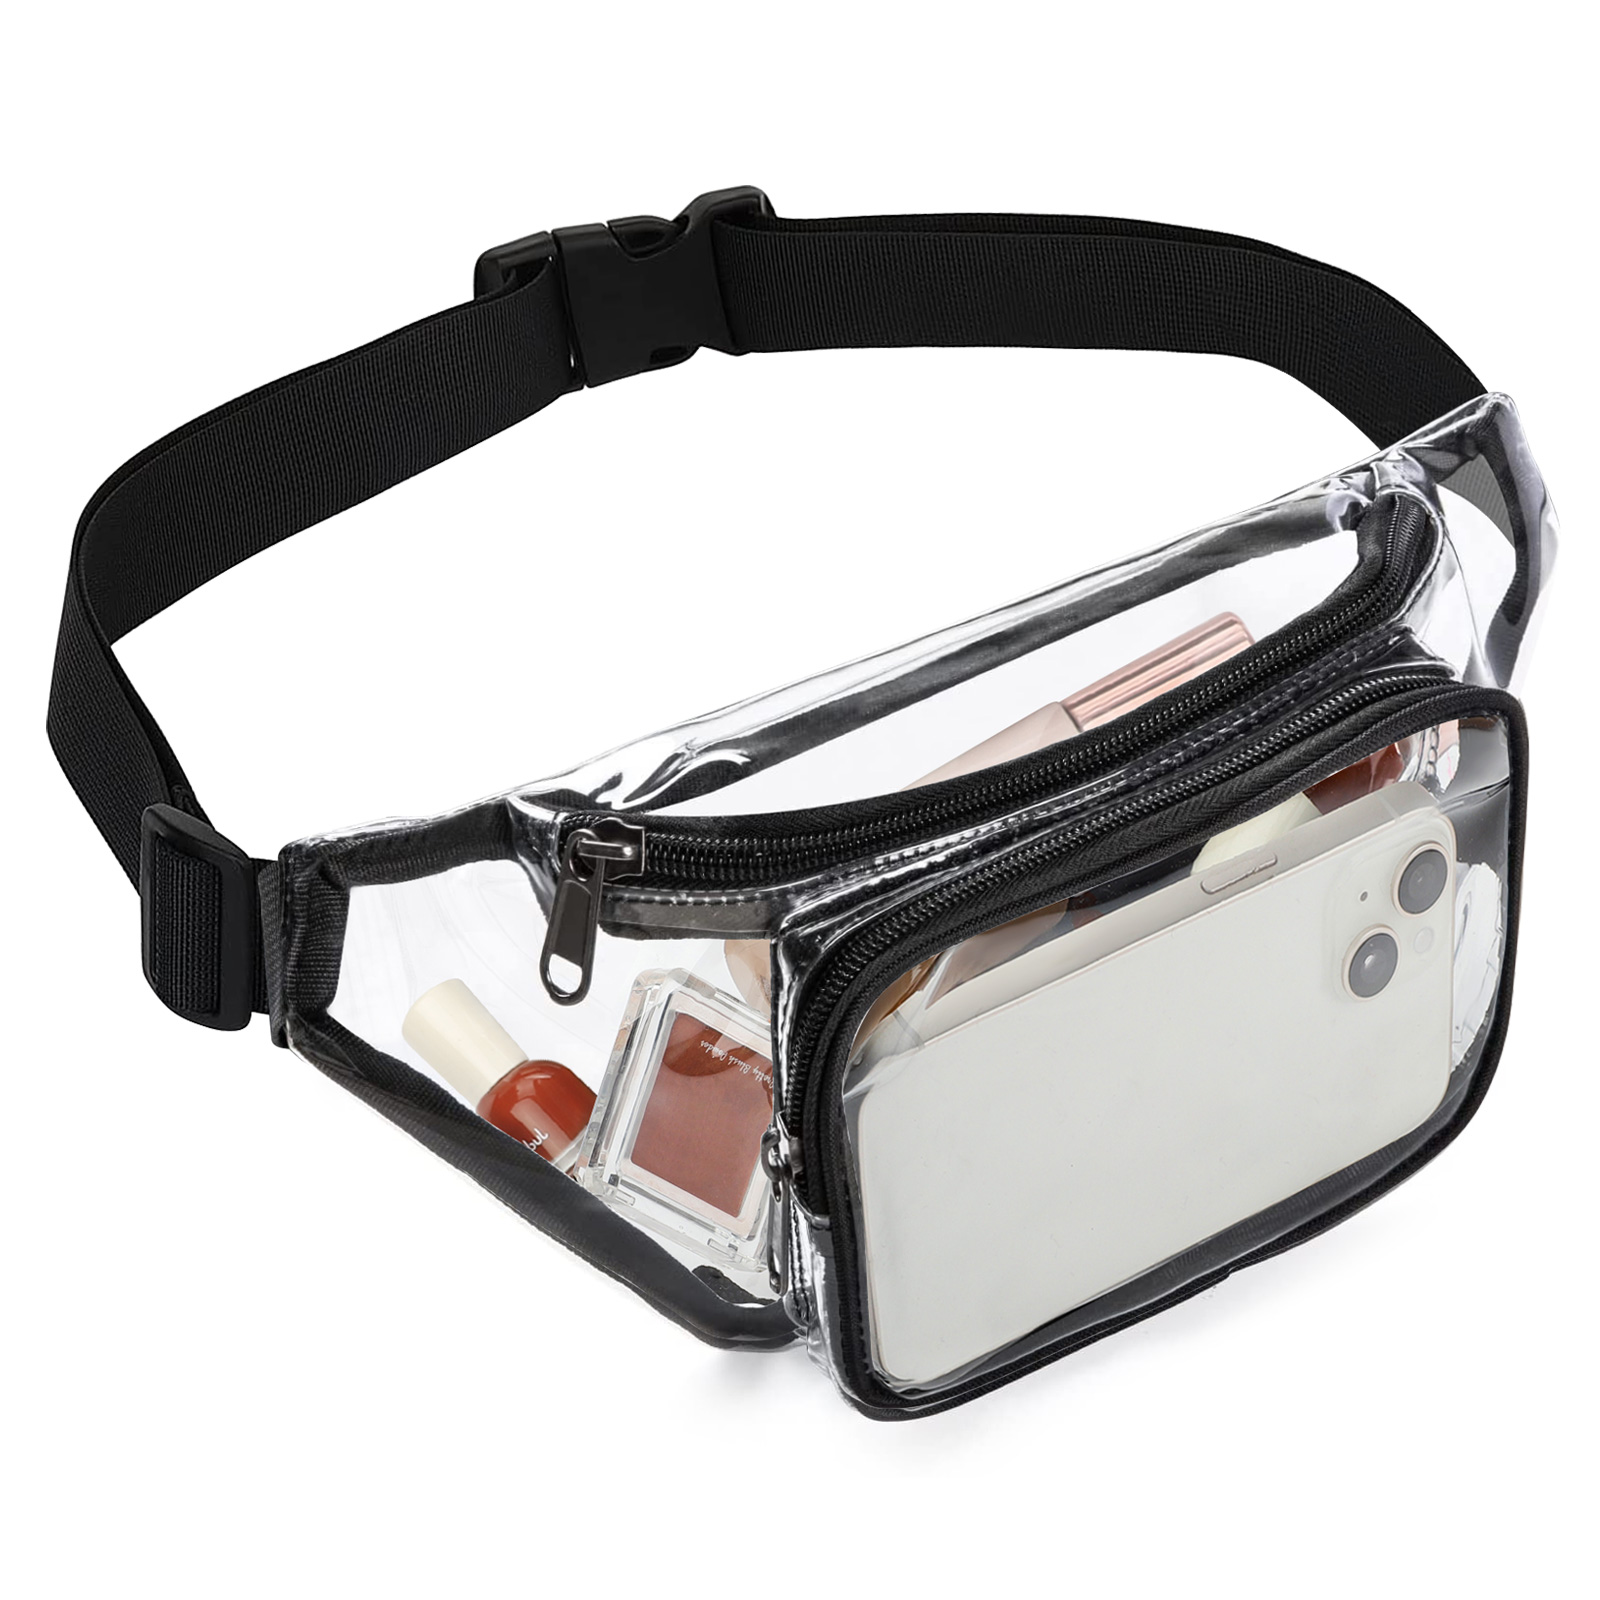 Clear Fanny Pack, EEEkit Waterproof Waist Bag for Stadium and Concerts, Chest Bag with Adjustable Belt Bag for Women Men - image 1 of 8